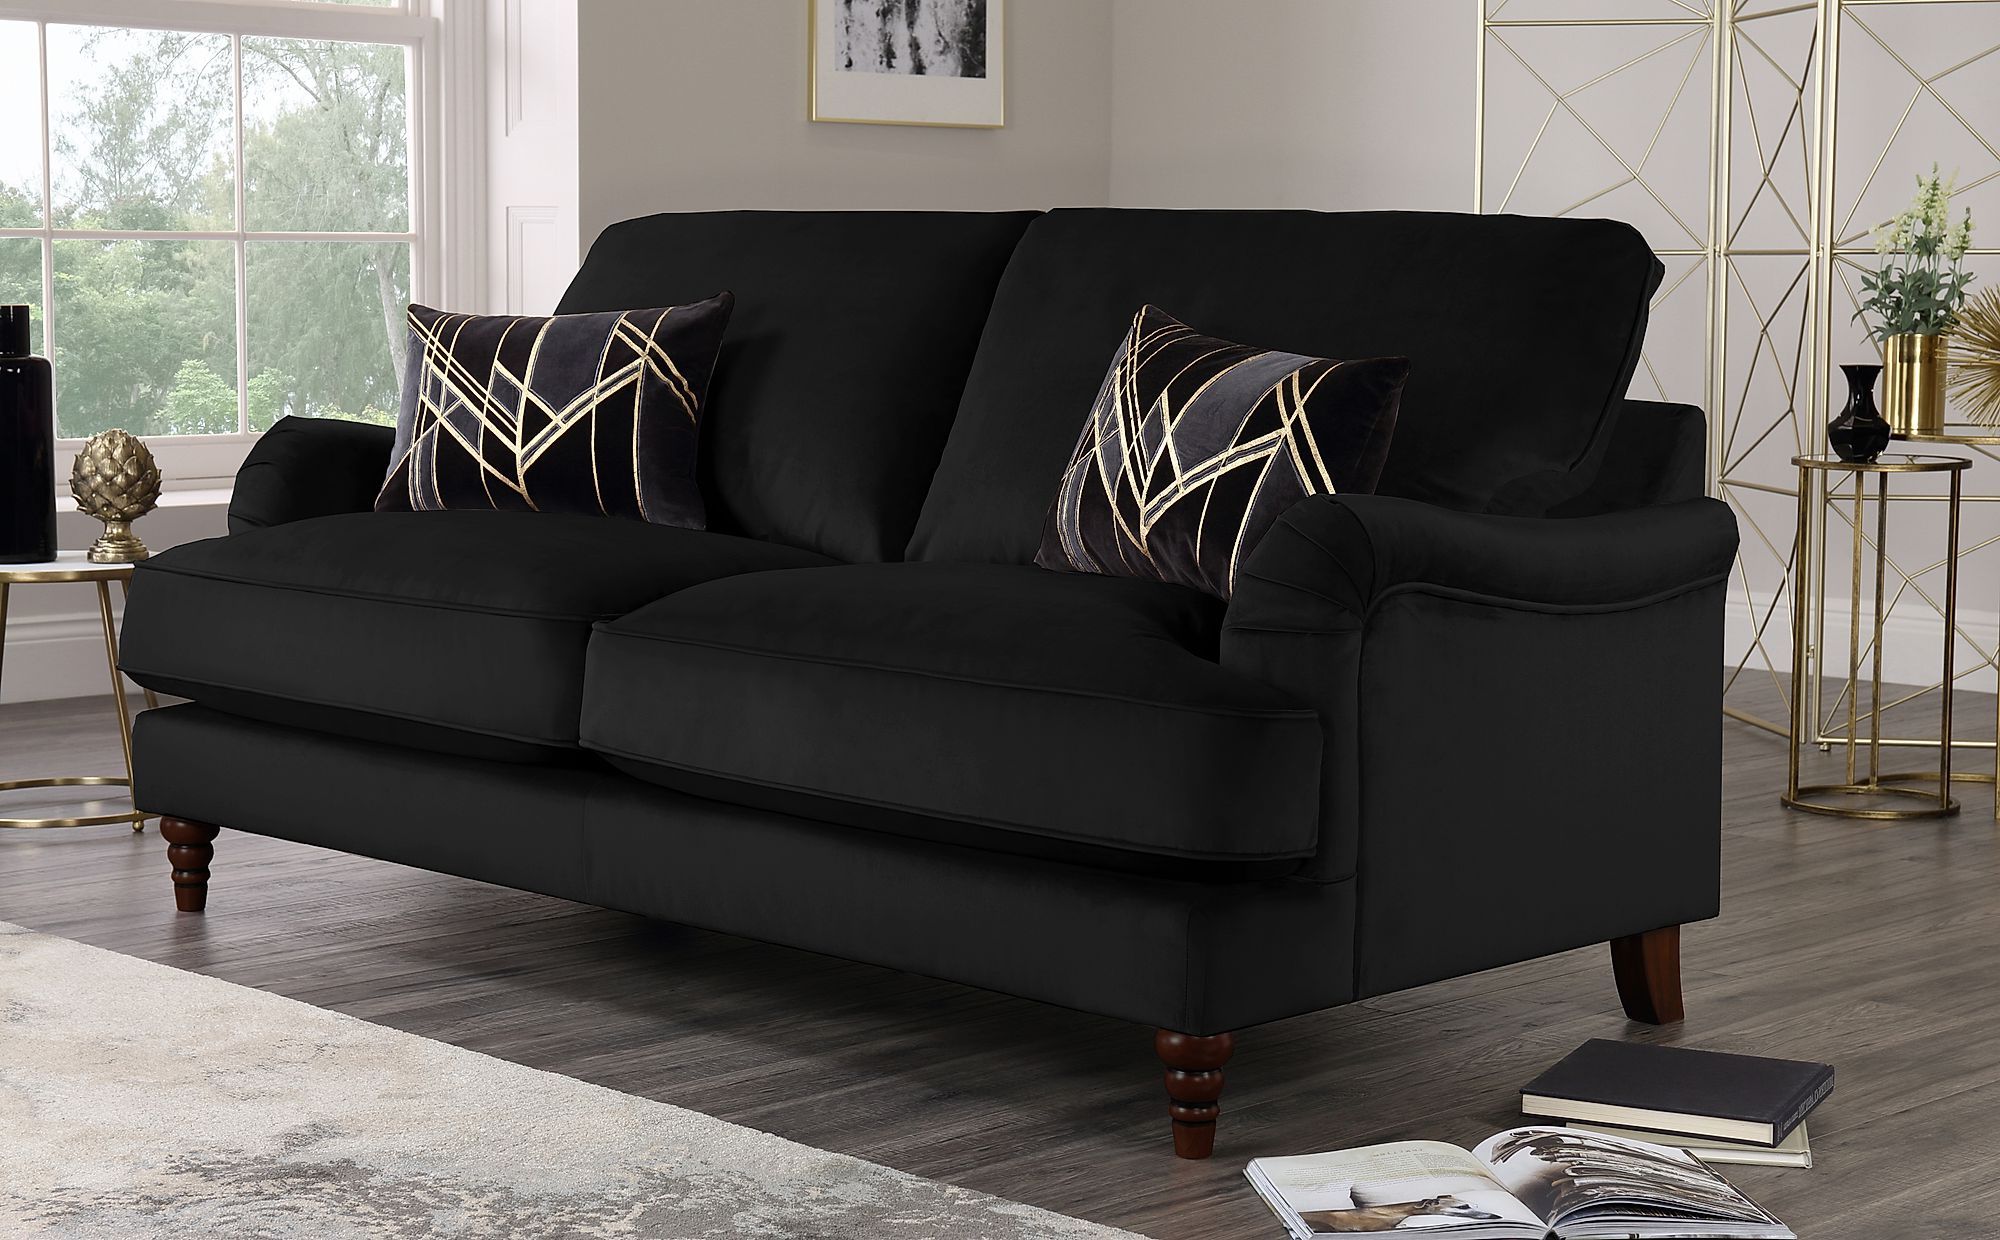 Charleston Black Velvet 3 Seater Sofa | Furniture Choice Intended For Traditional Black Fabric Sofas (View 5 of 20)